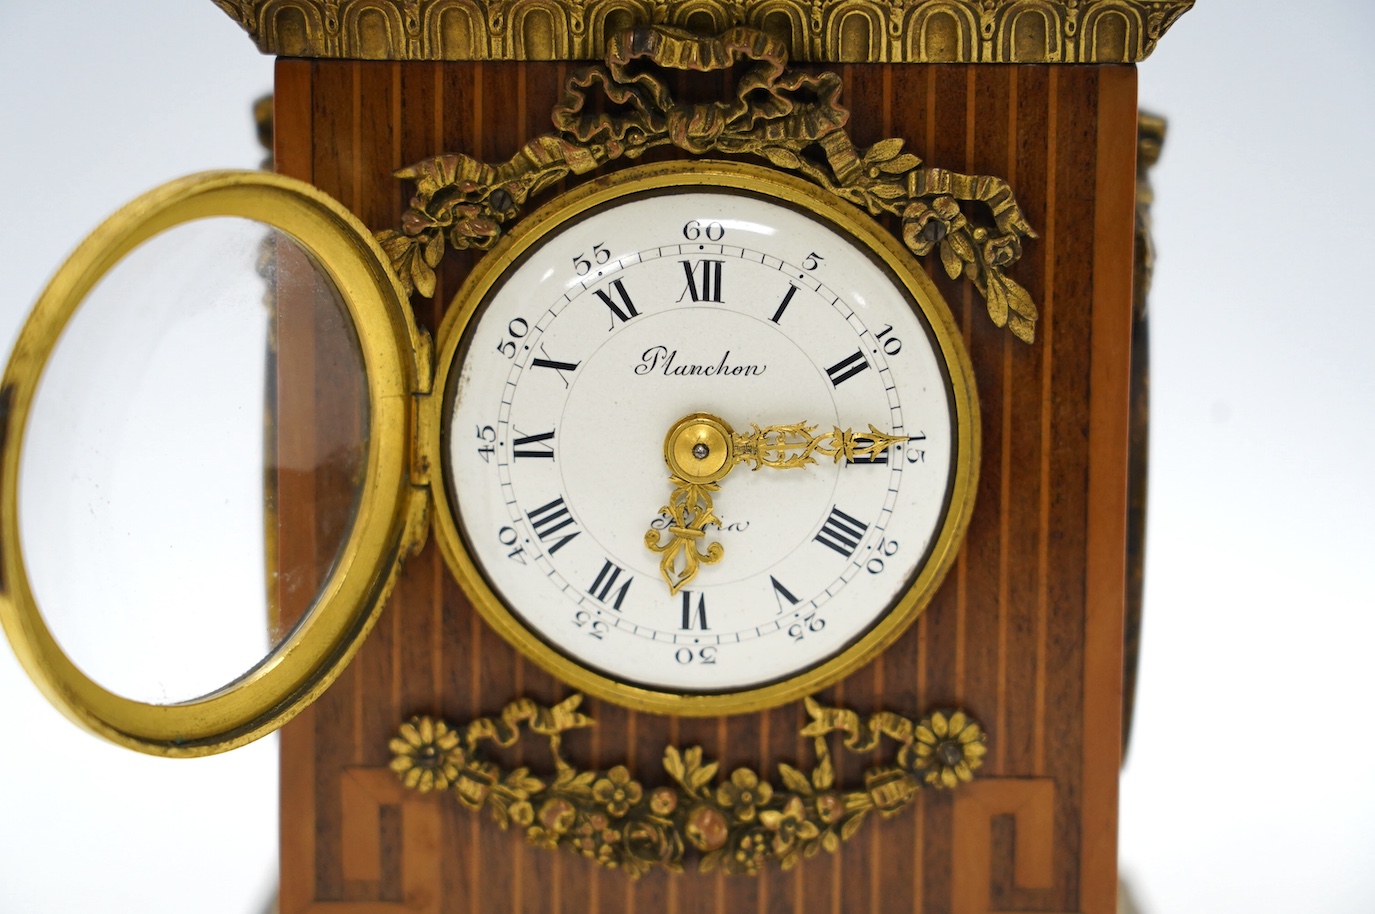 A 19th century French ormolu mounted, mahogany and box wood inlaid timepiece, by Planchon of Paris, with Wedgwood style plaques inlaid to sides, key included, 23cm. Condition - fair to good, not tested as working